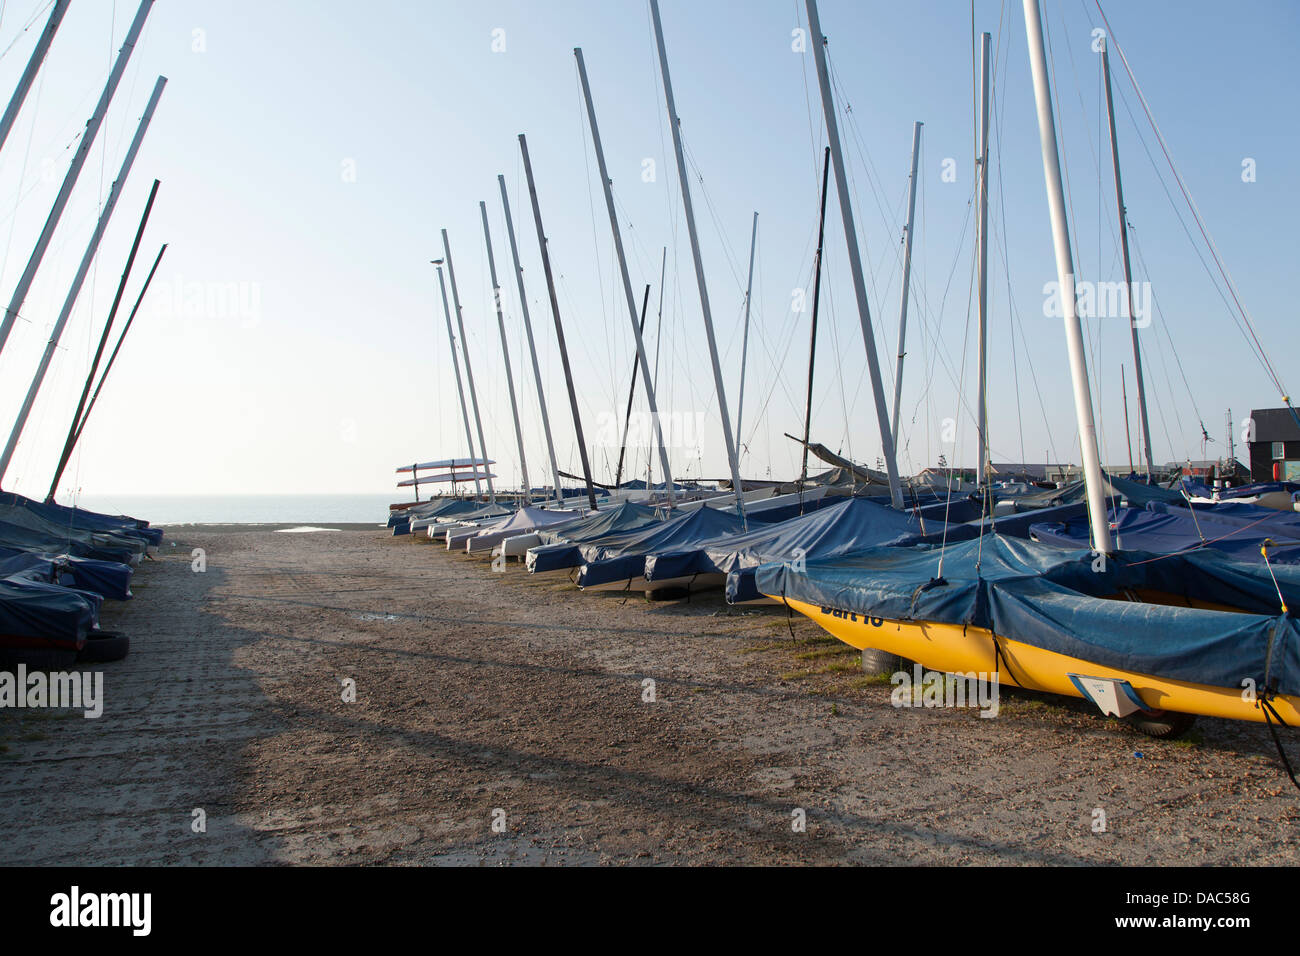 sail mast, ship masts, sea background, sunset, boats in foreground, sunshine and seaside, Whitstable, pathway, Stock Photo